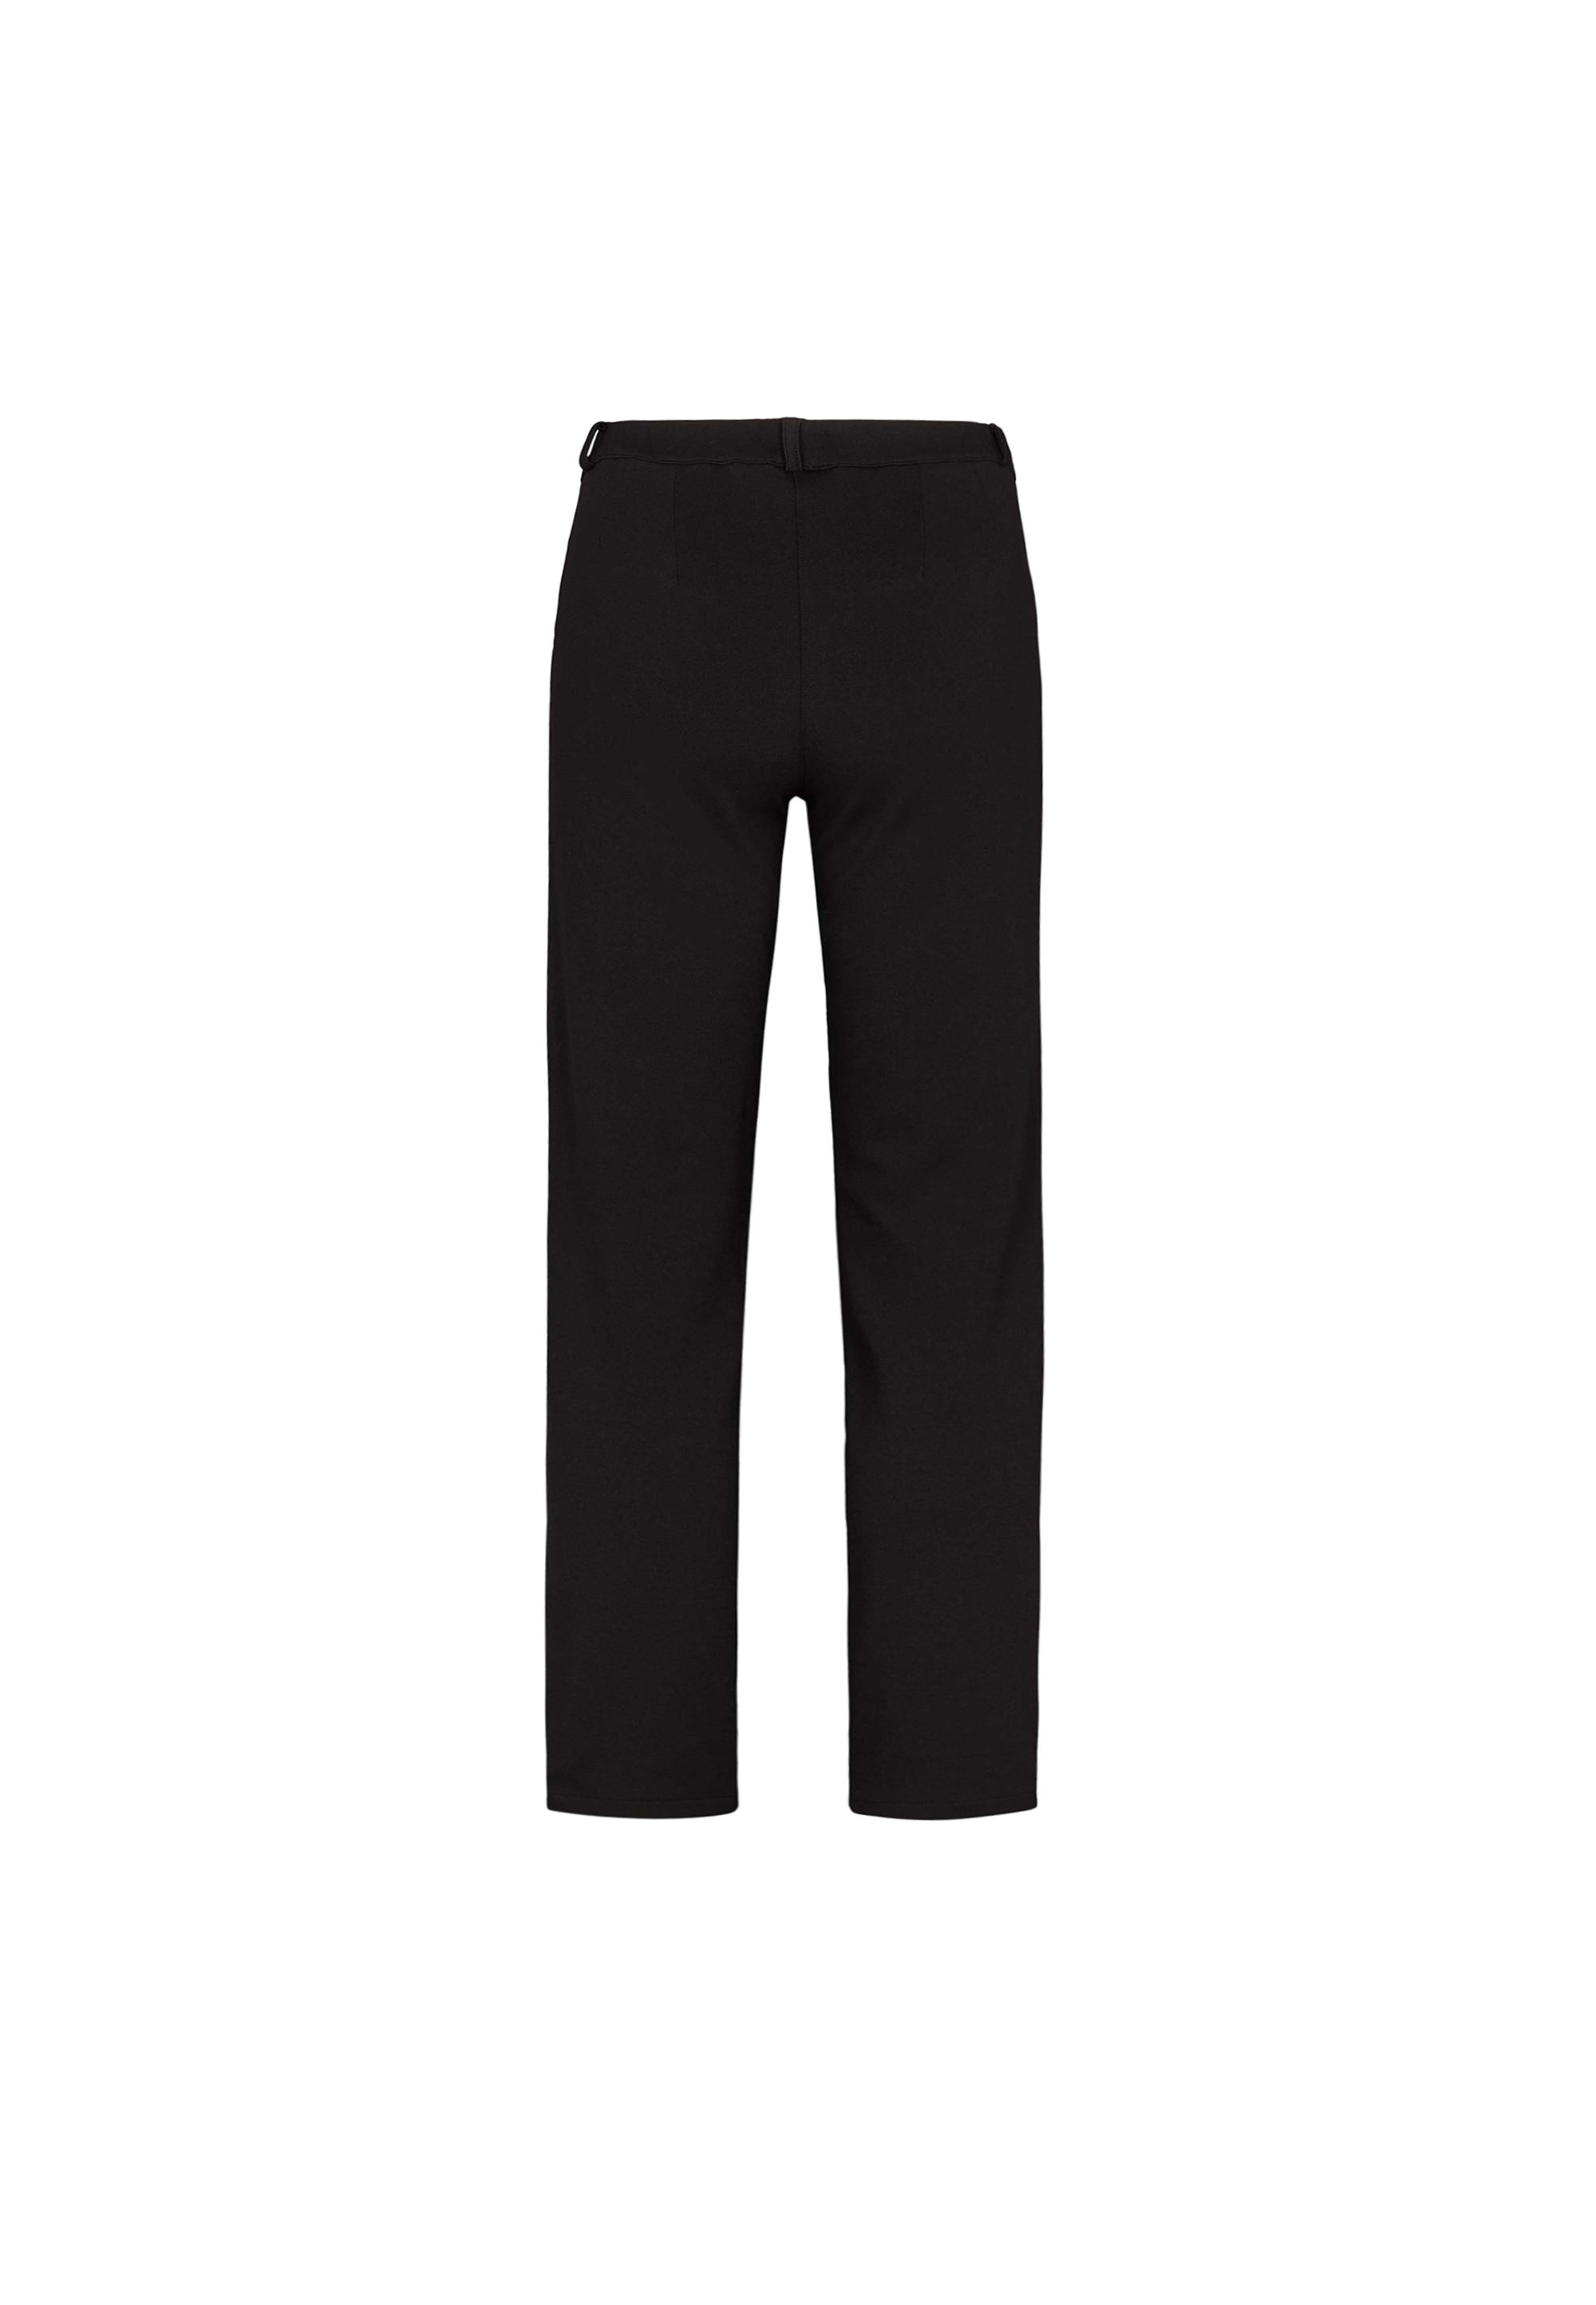 LAURIE  Ruby Straight - Medium Length Trousers STRAIGHT 99143 Black brushed